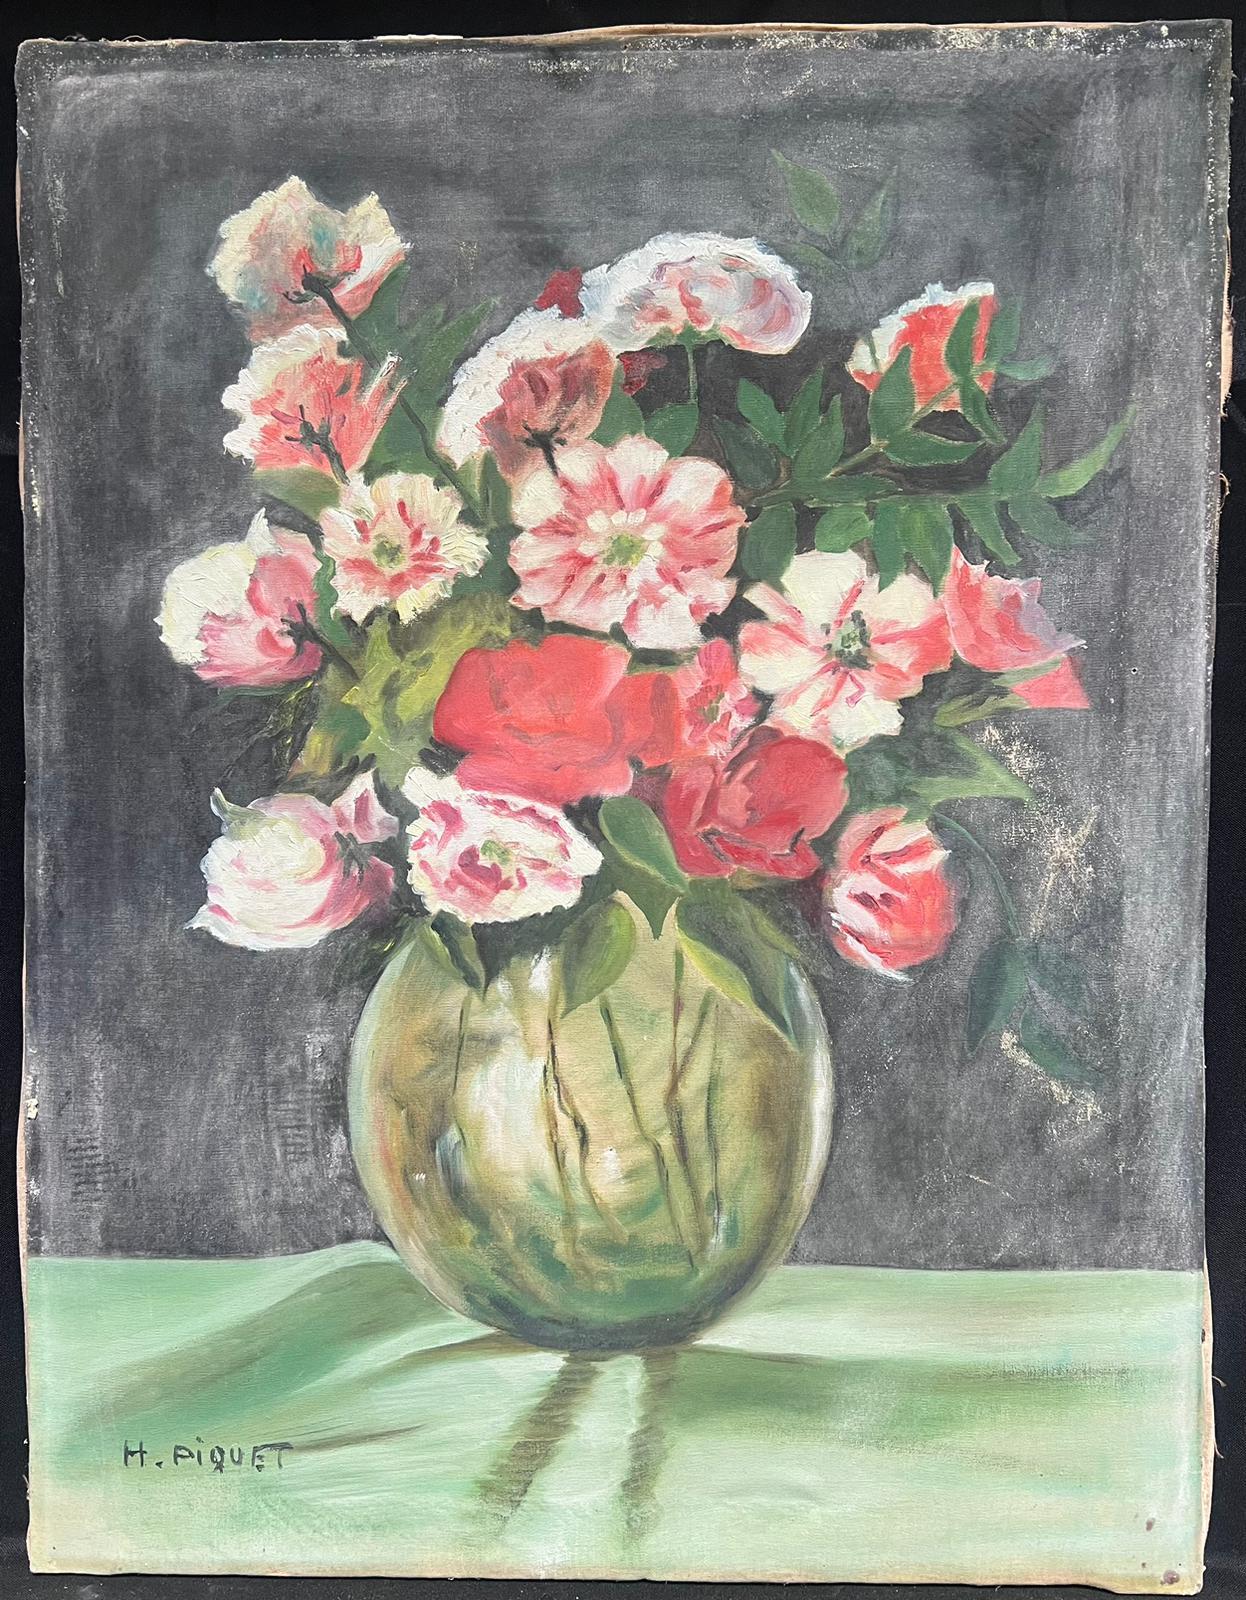 Vintage Still Life Flowers in Vase
French artist, mid 20th century
signed oil on canvas, unframed
canvas: 25.5 x 20 inches
provenance: private collection
condition: scruffy but sound condition 